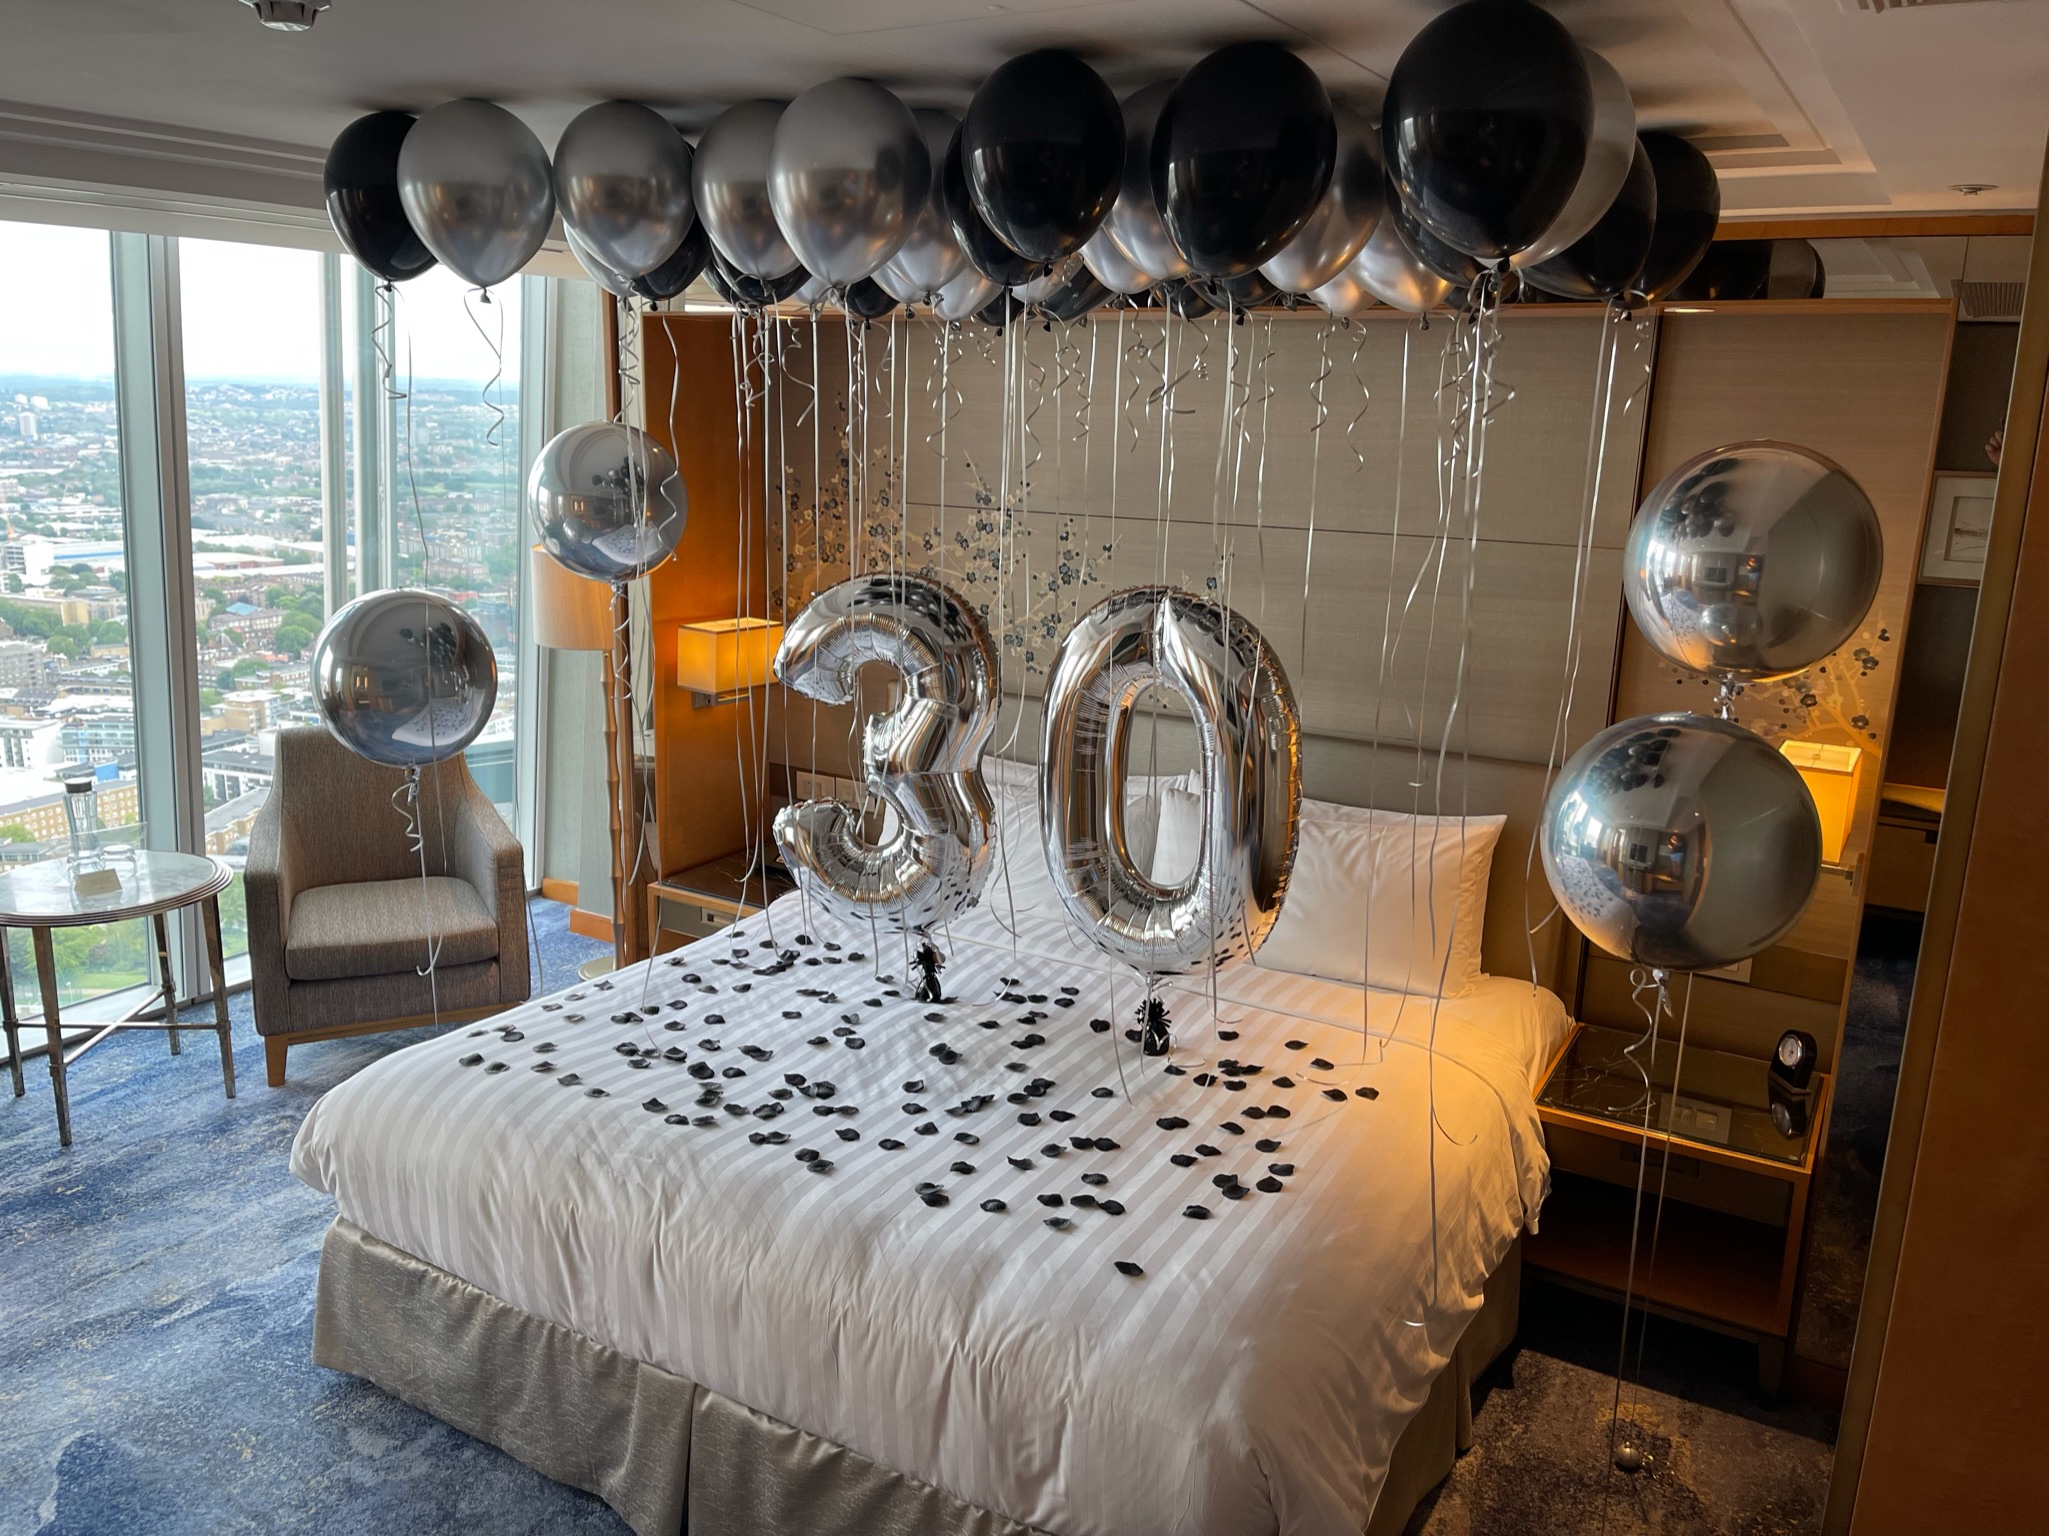 Hotel room decorated with number 30 balloons 2